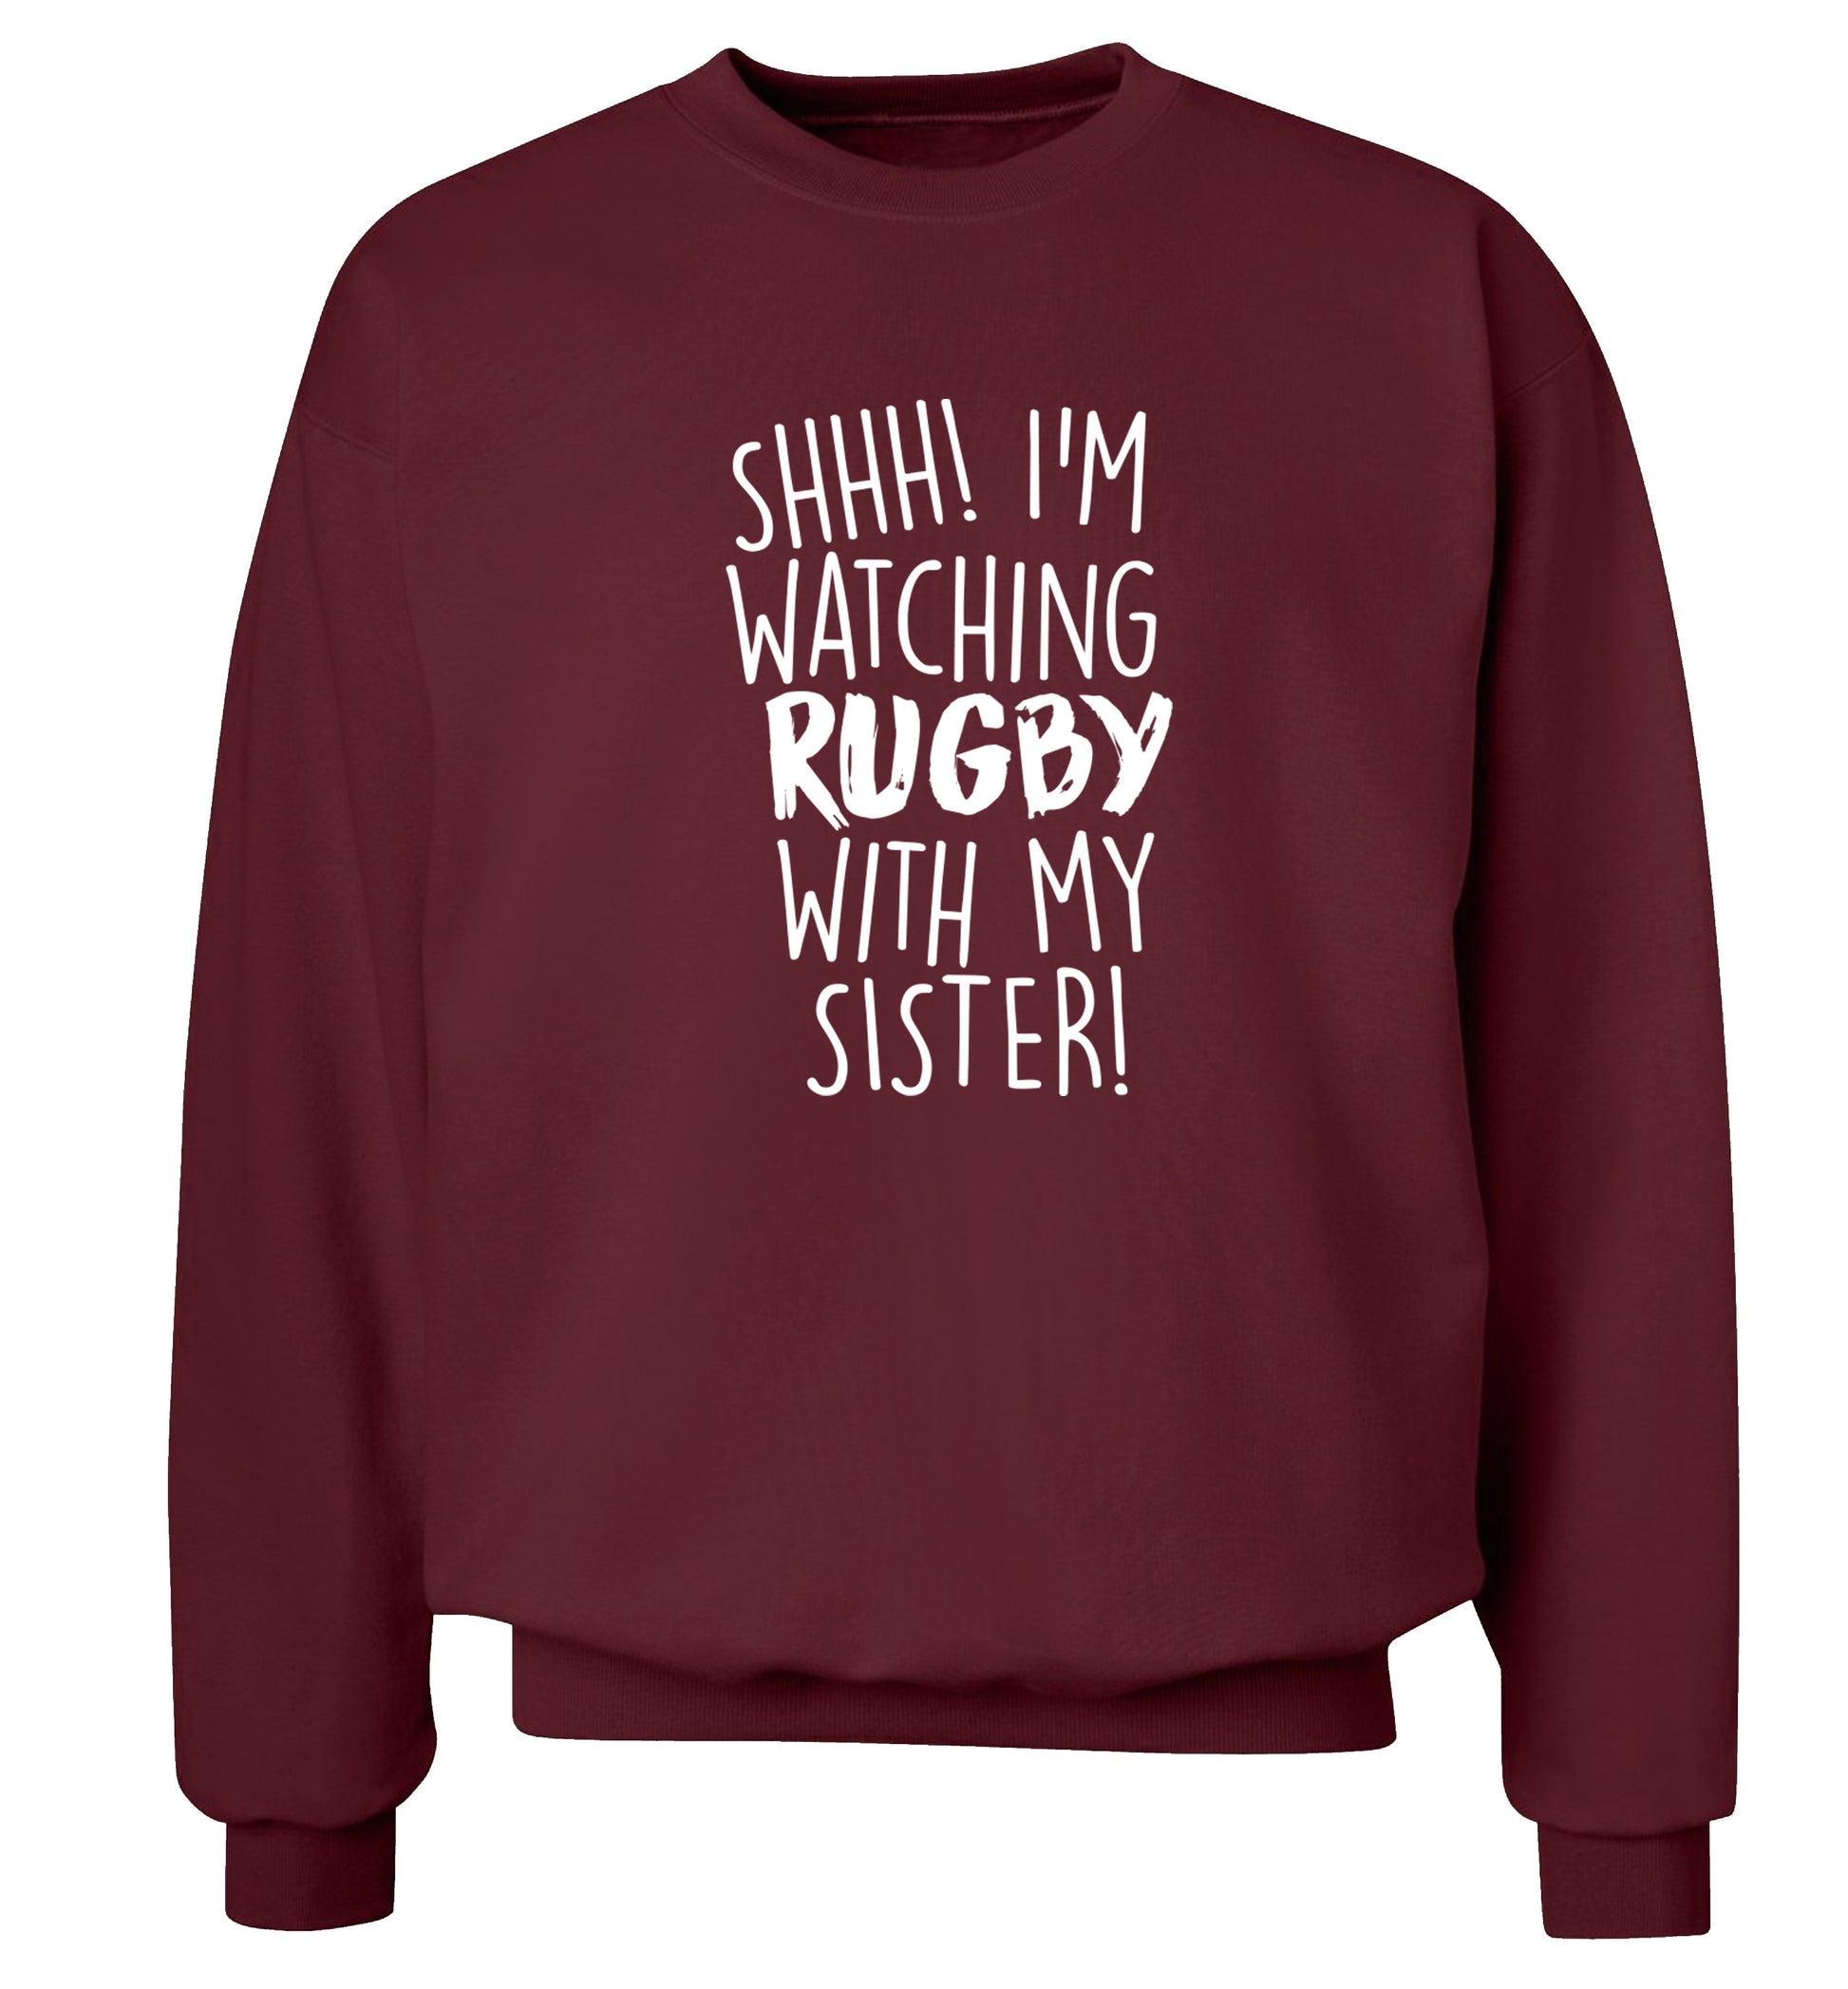 Shh... I'm watching rugby with my sister Adult's unisex maroon Sweater 2XL